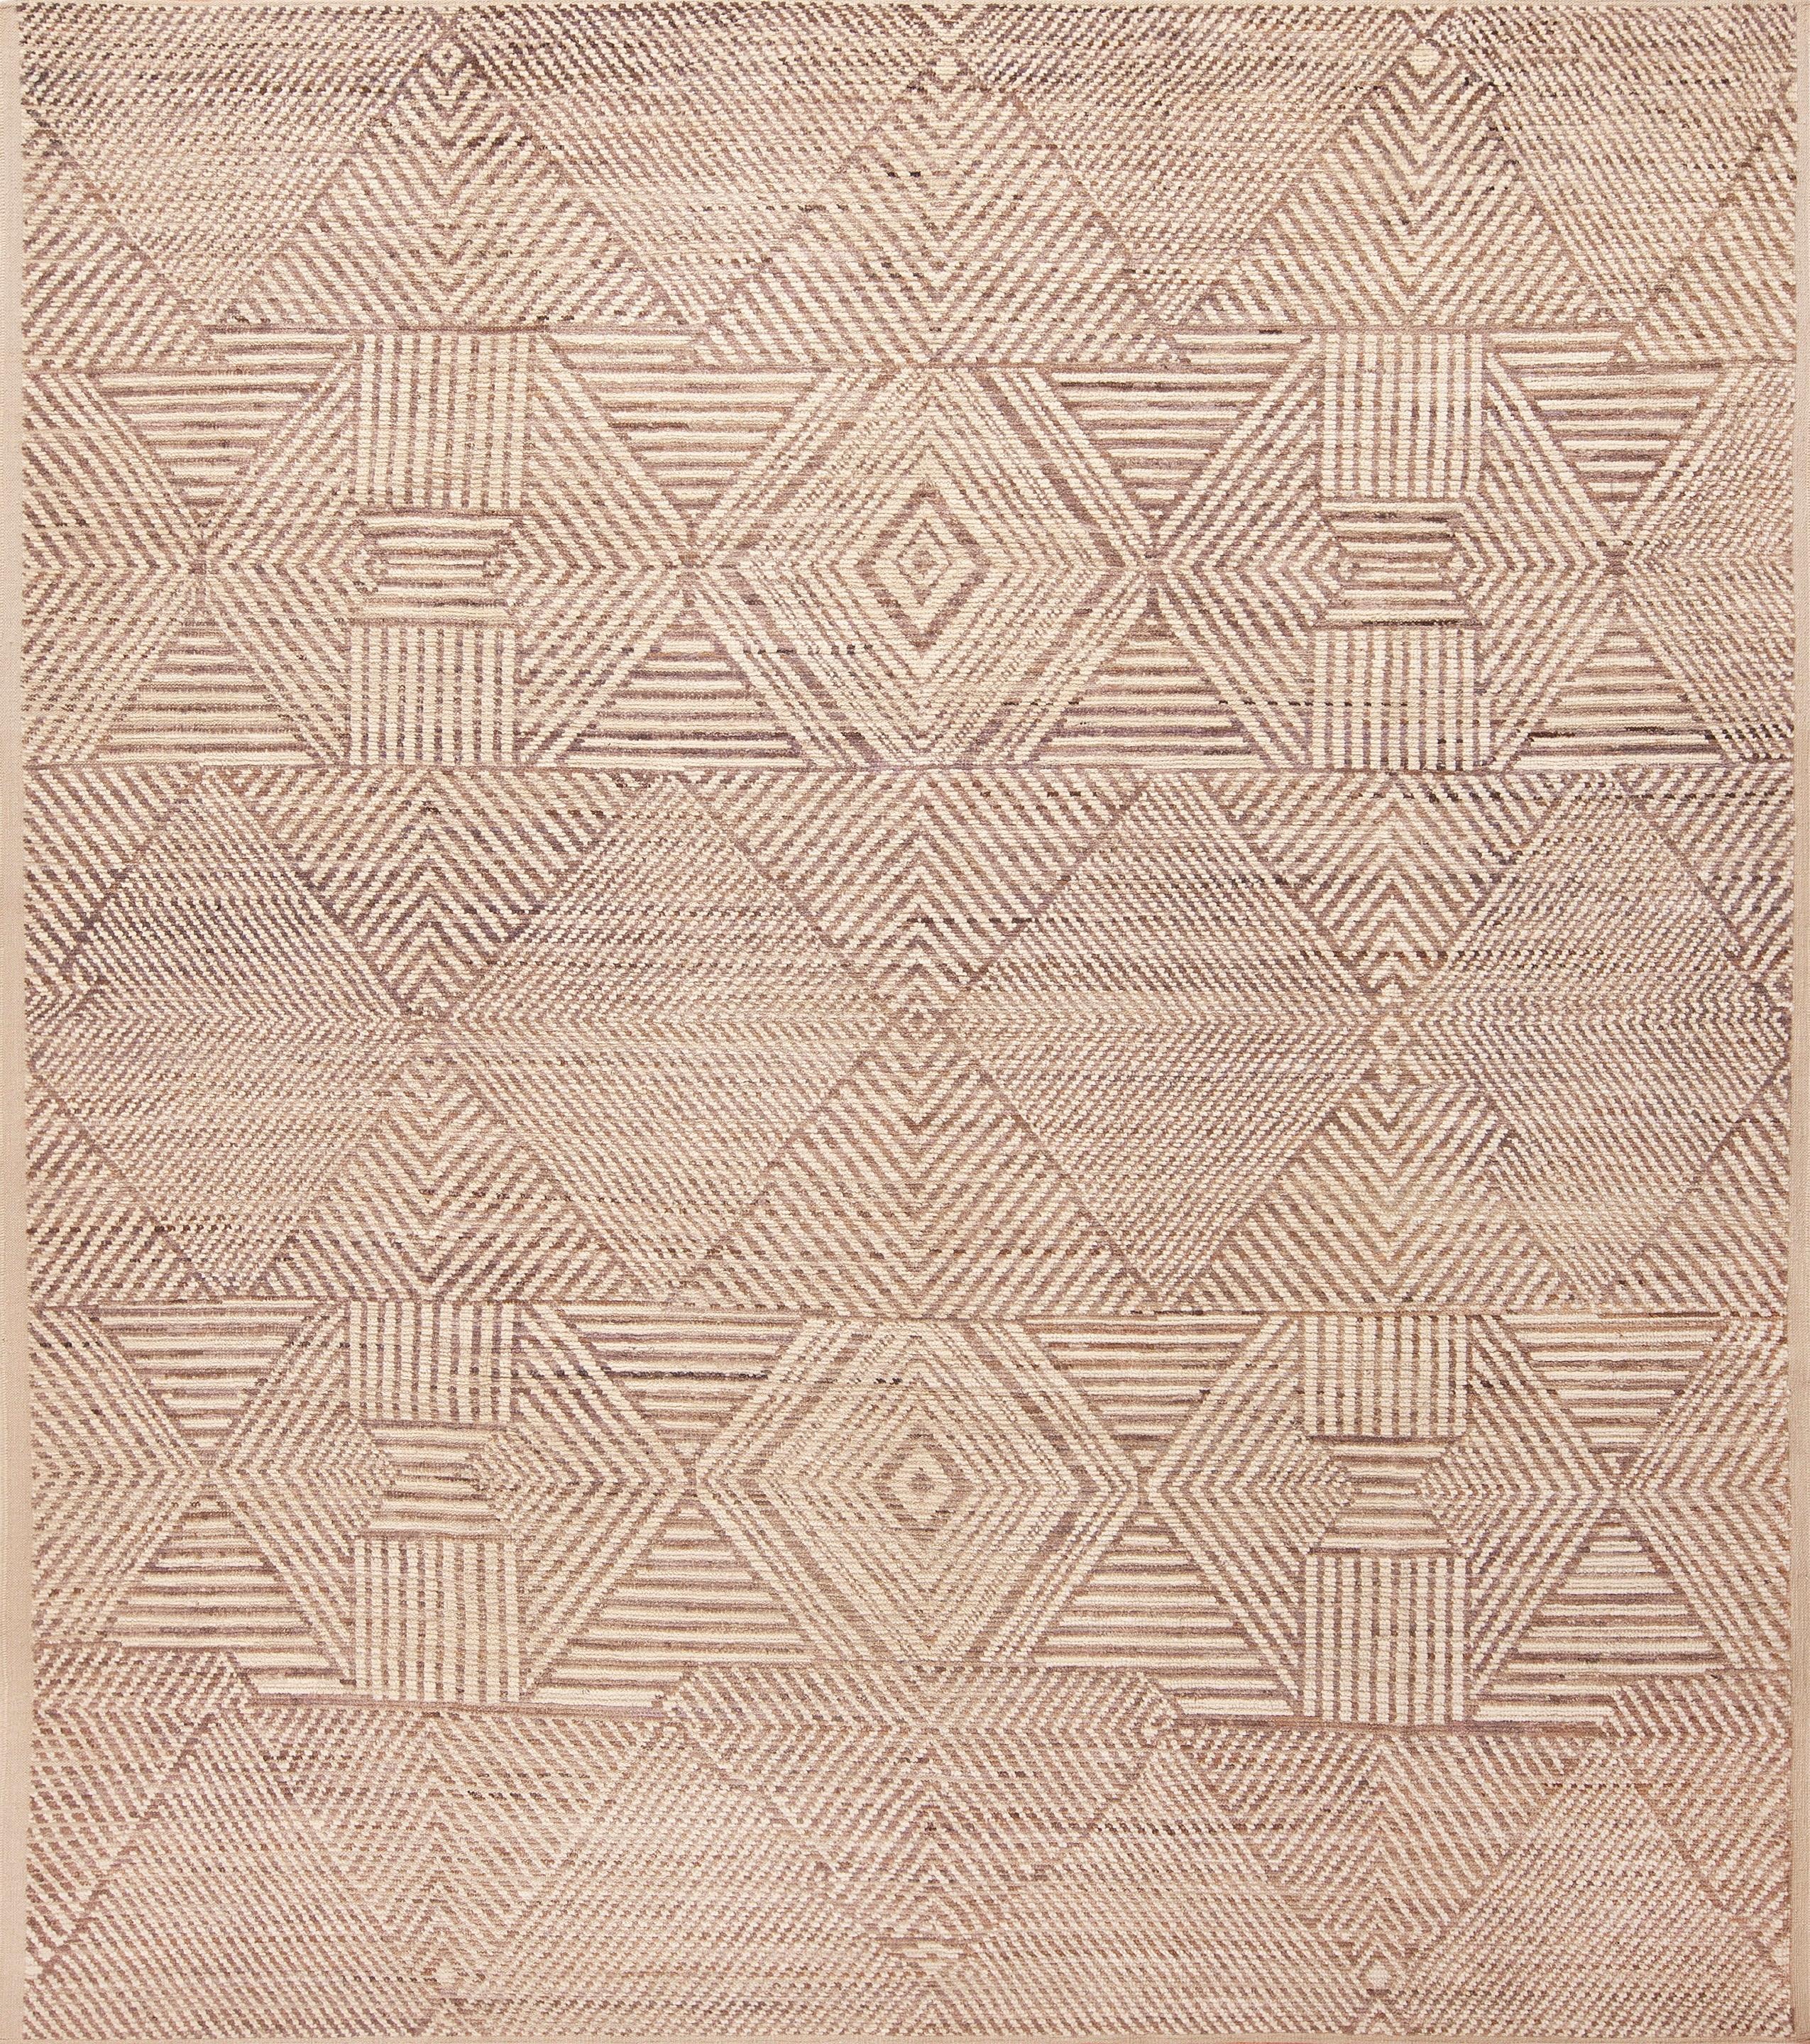 Central Asian Nazmiyal Collection North African Inspired Modern Geometric Neutral Rug 9' x 10' For Sale